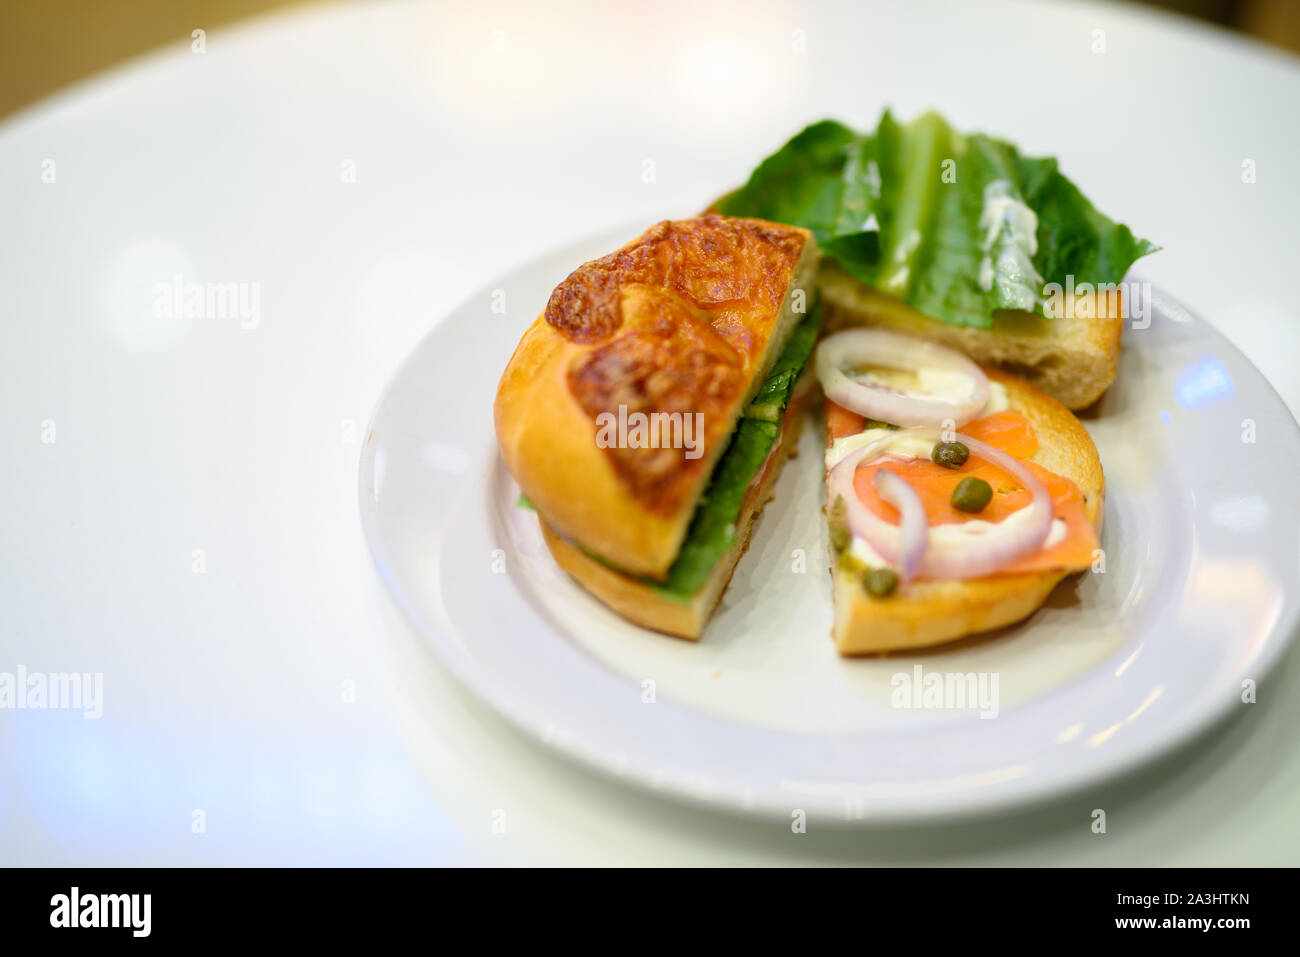 Bagel With Smoked Salmon And Vegetables Served On Table Stock Photo